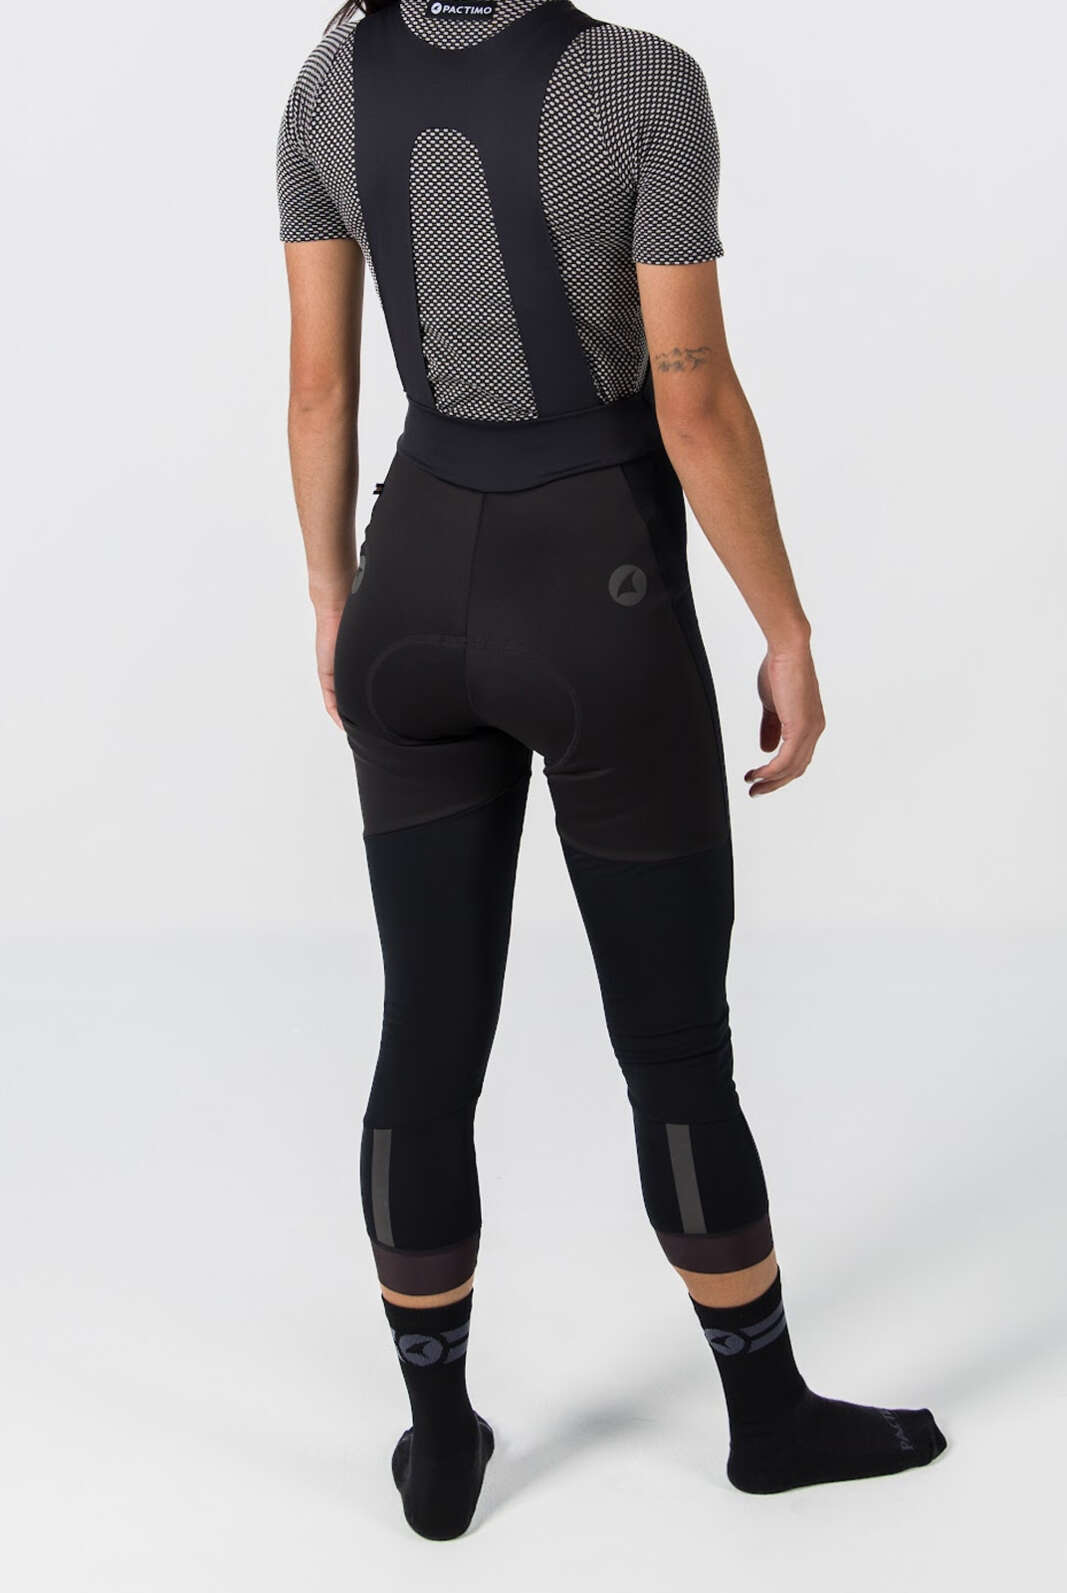 Women's Water-Repelling 3/4 Thermal Cycling Bib Tights - Back View